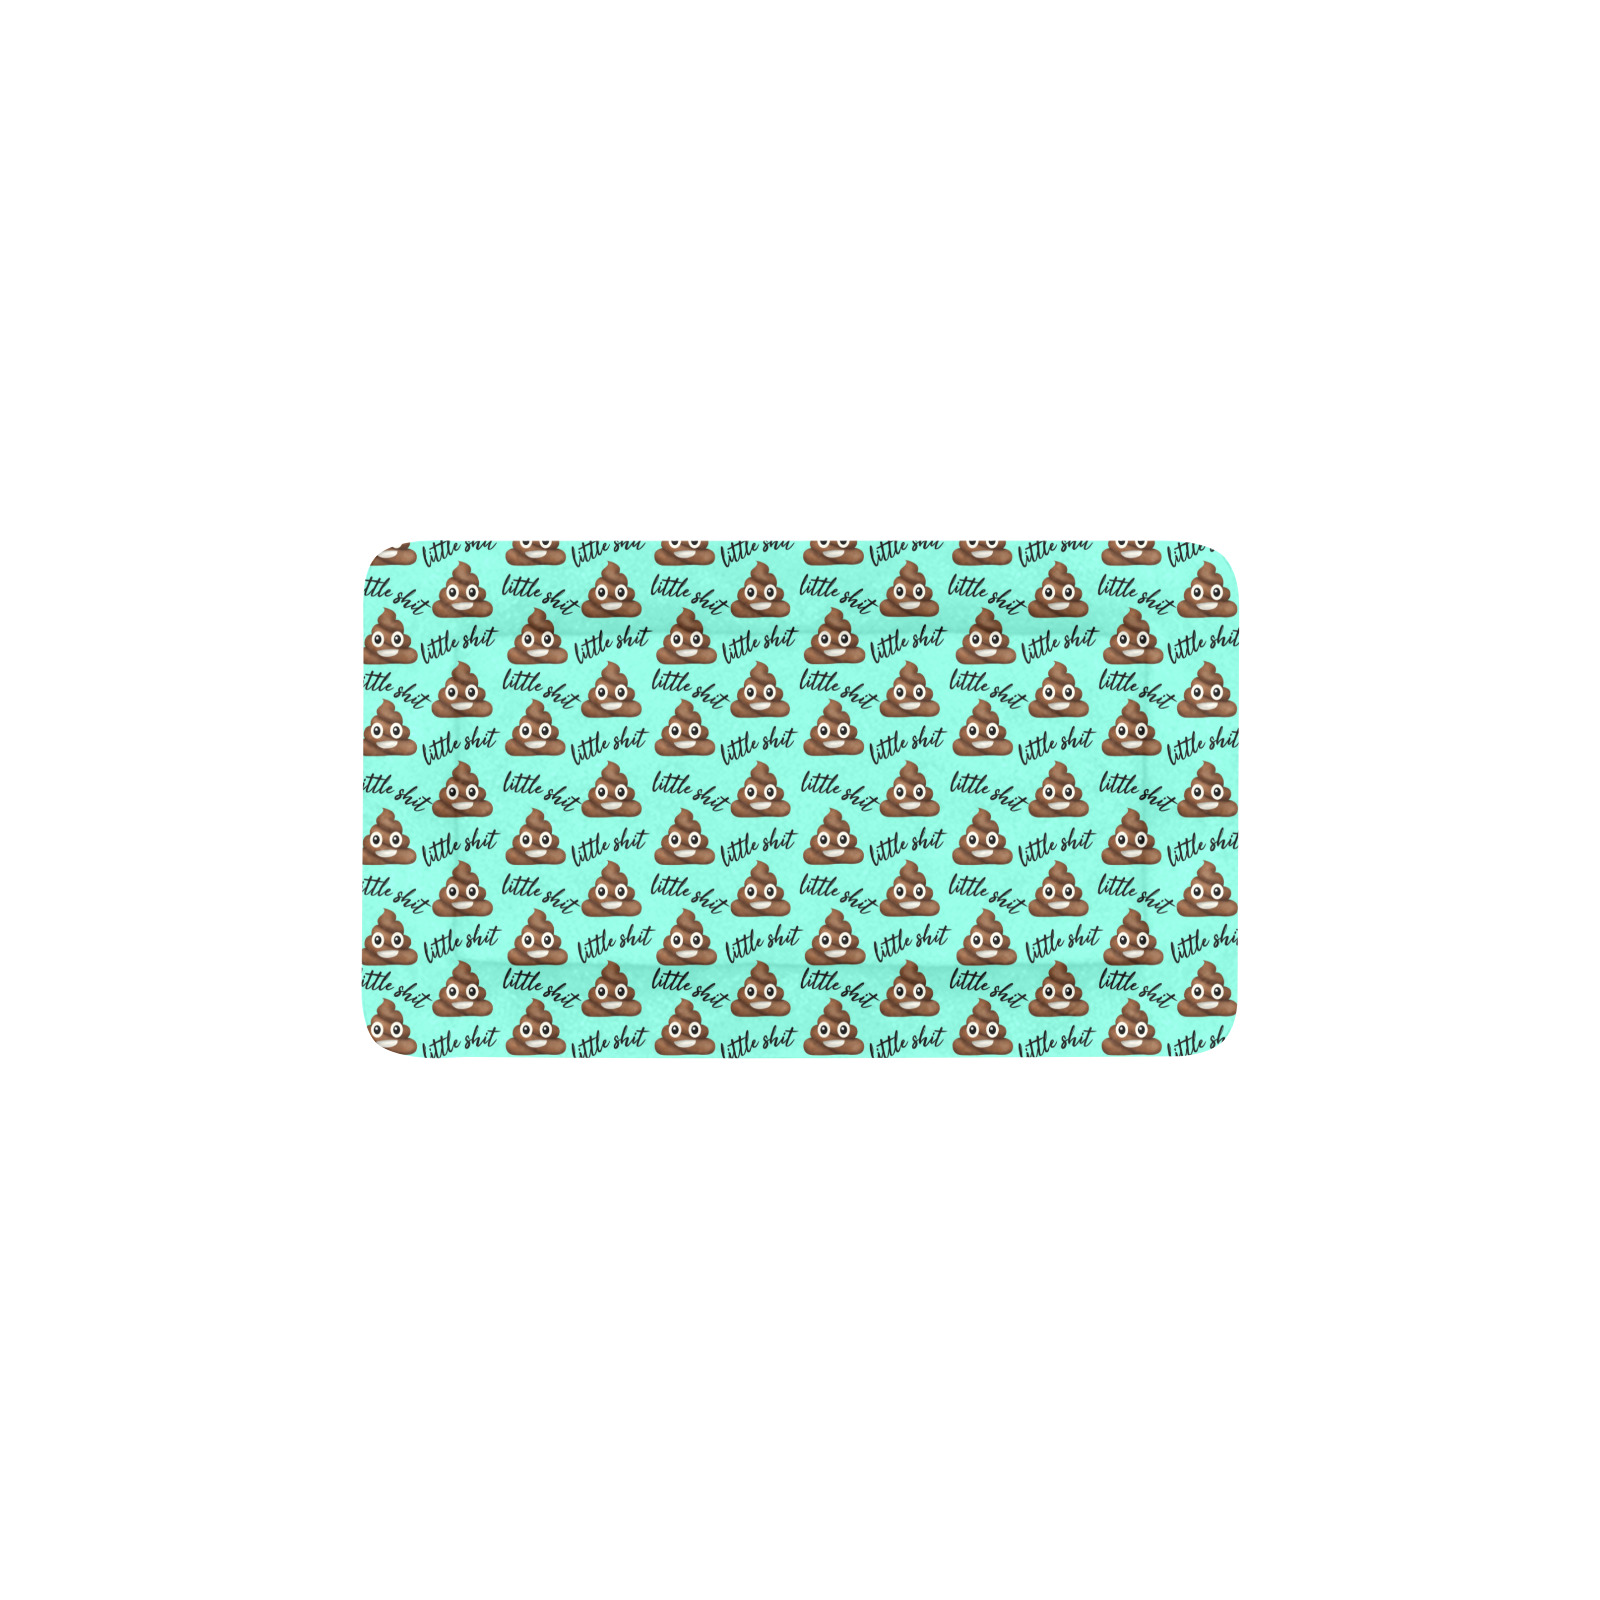 Little sh!t cute on turquoise Pet Bed 22"x13"